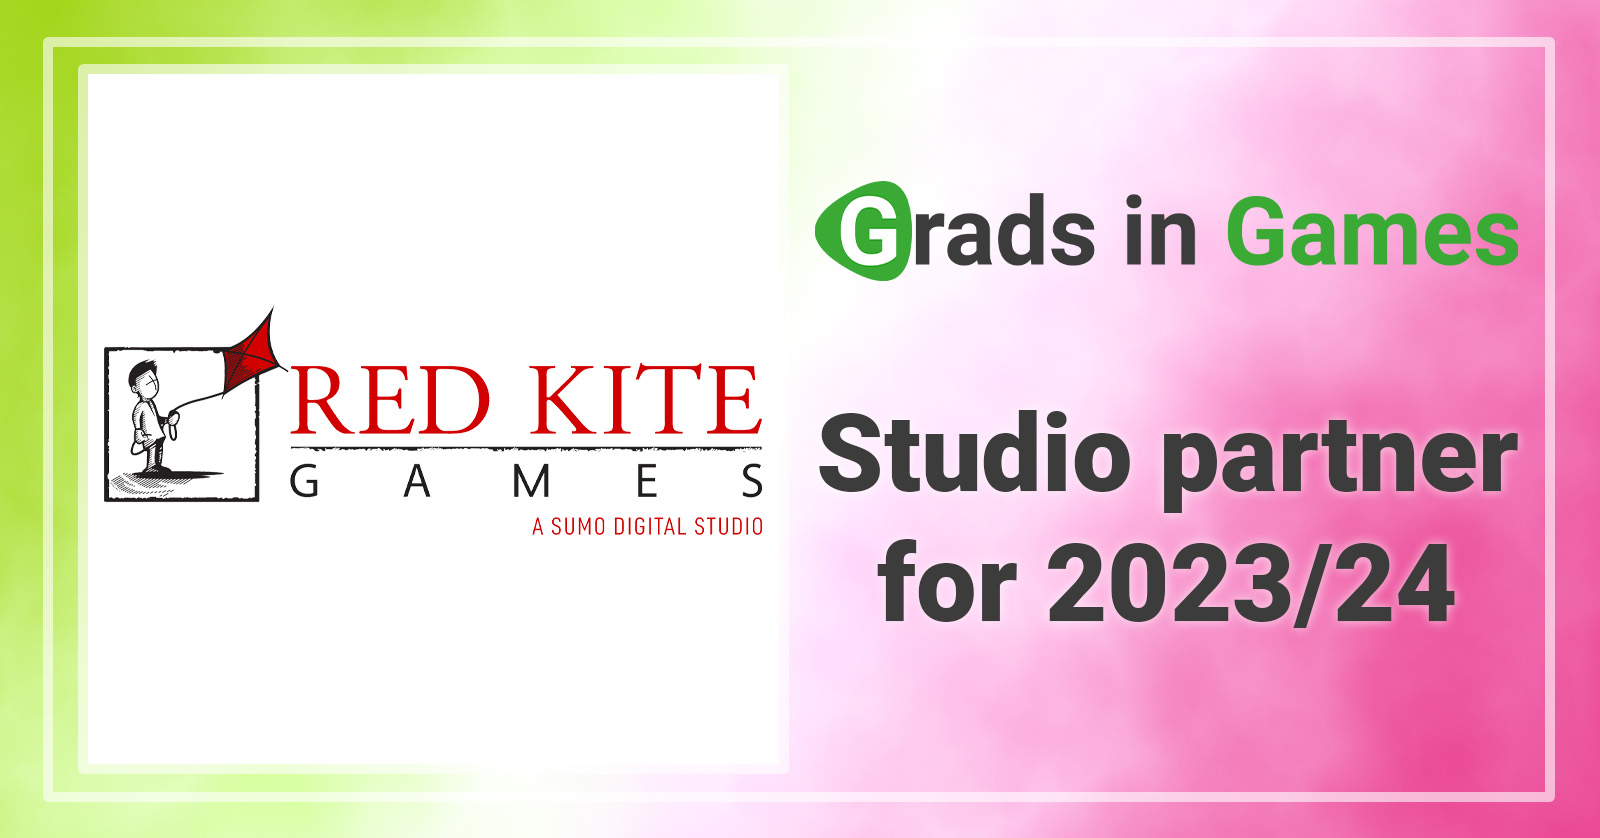 Welcome back to Red Kite Games as a partner studio!